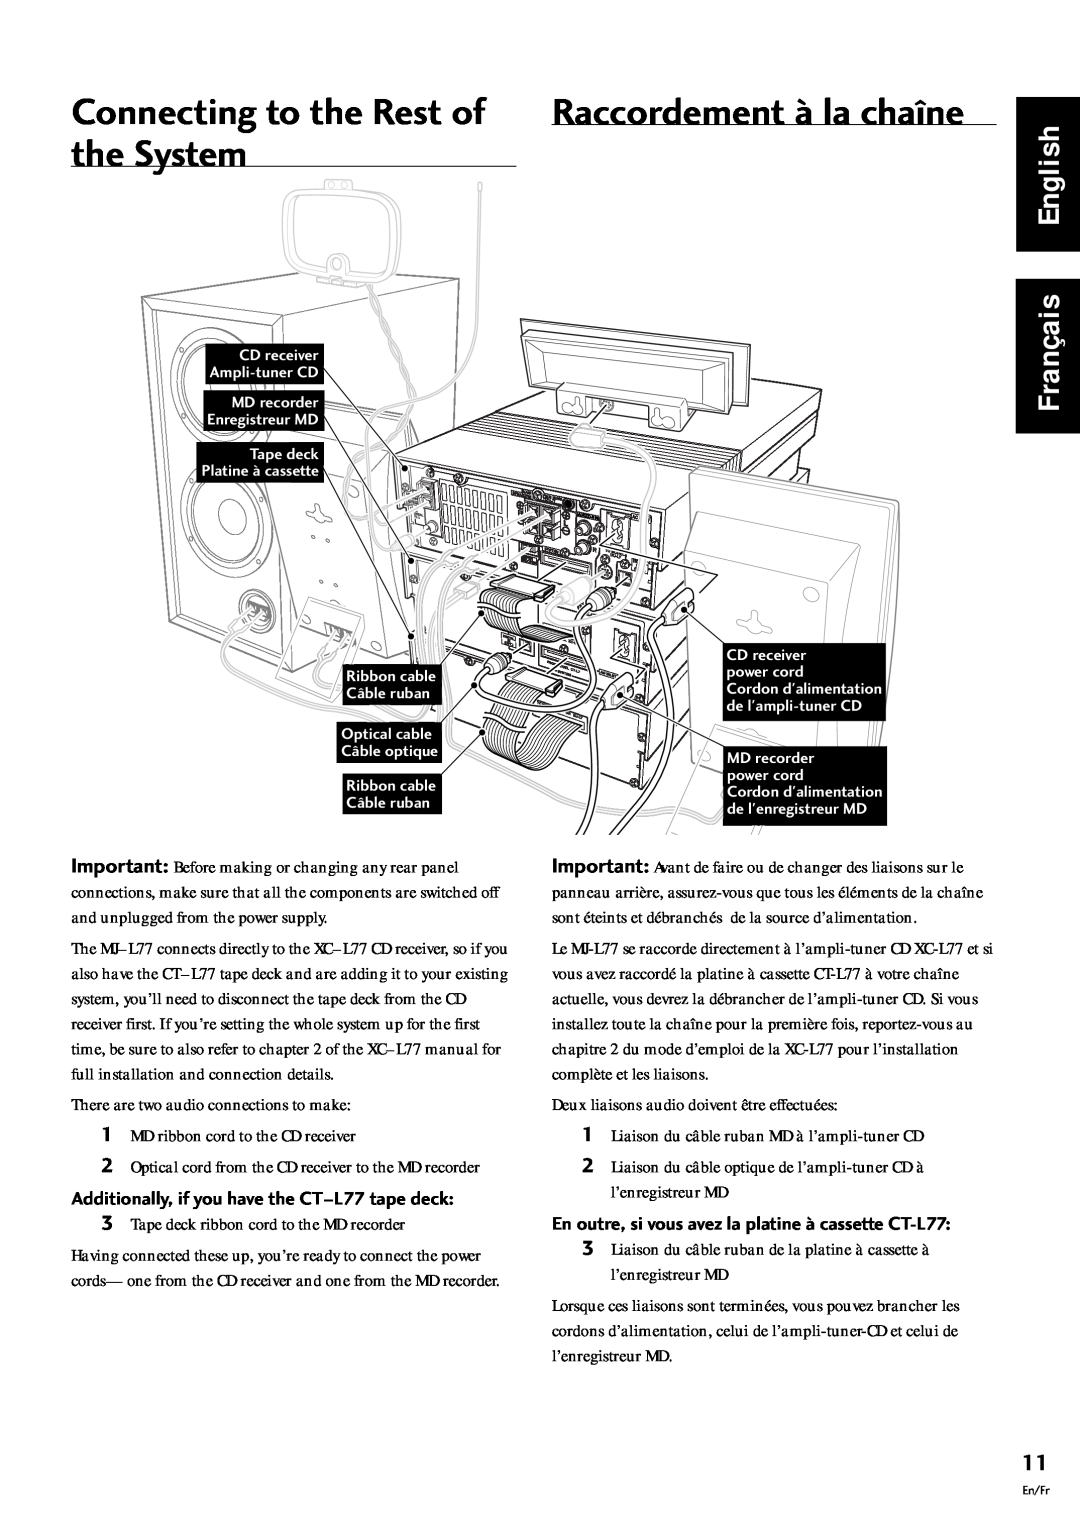 Pioneer MJ-L77 operating instructions the System, Connecting to the Rest of, Raccordement ˆ la cha”ne, Français English 